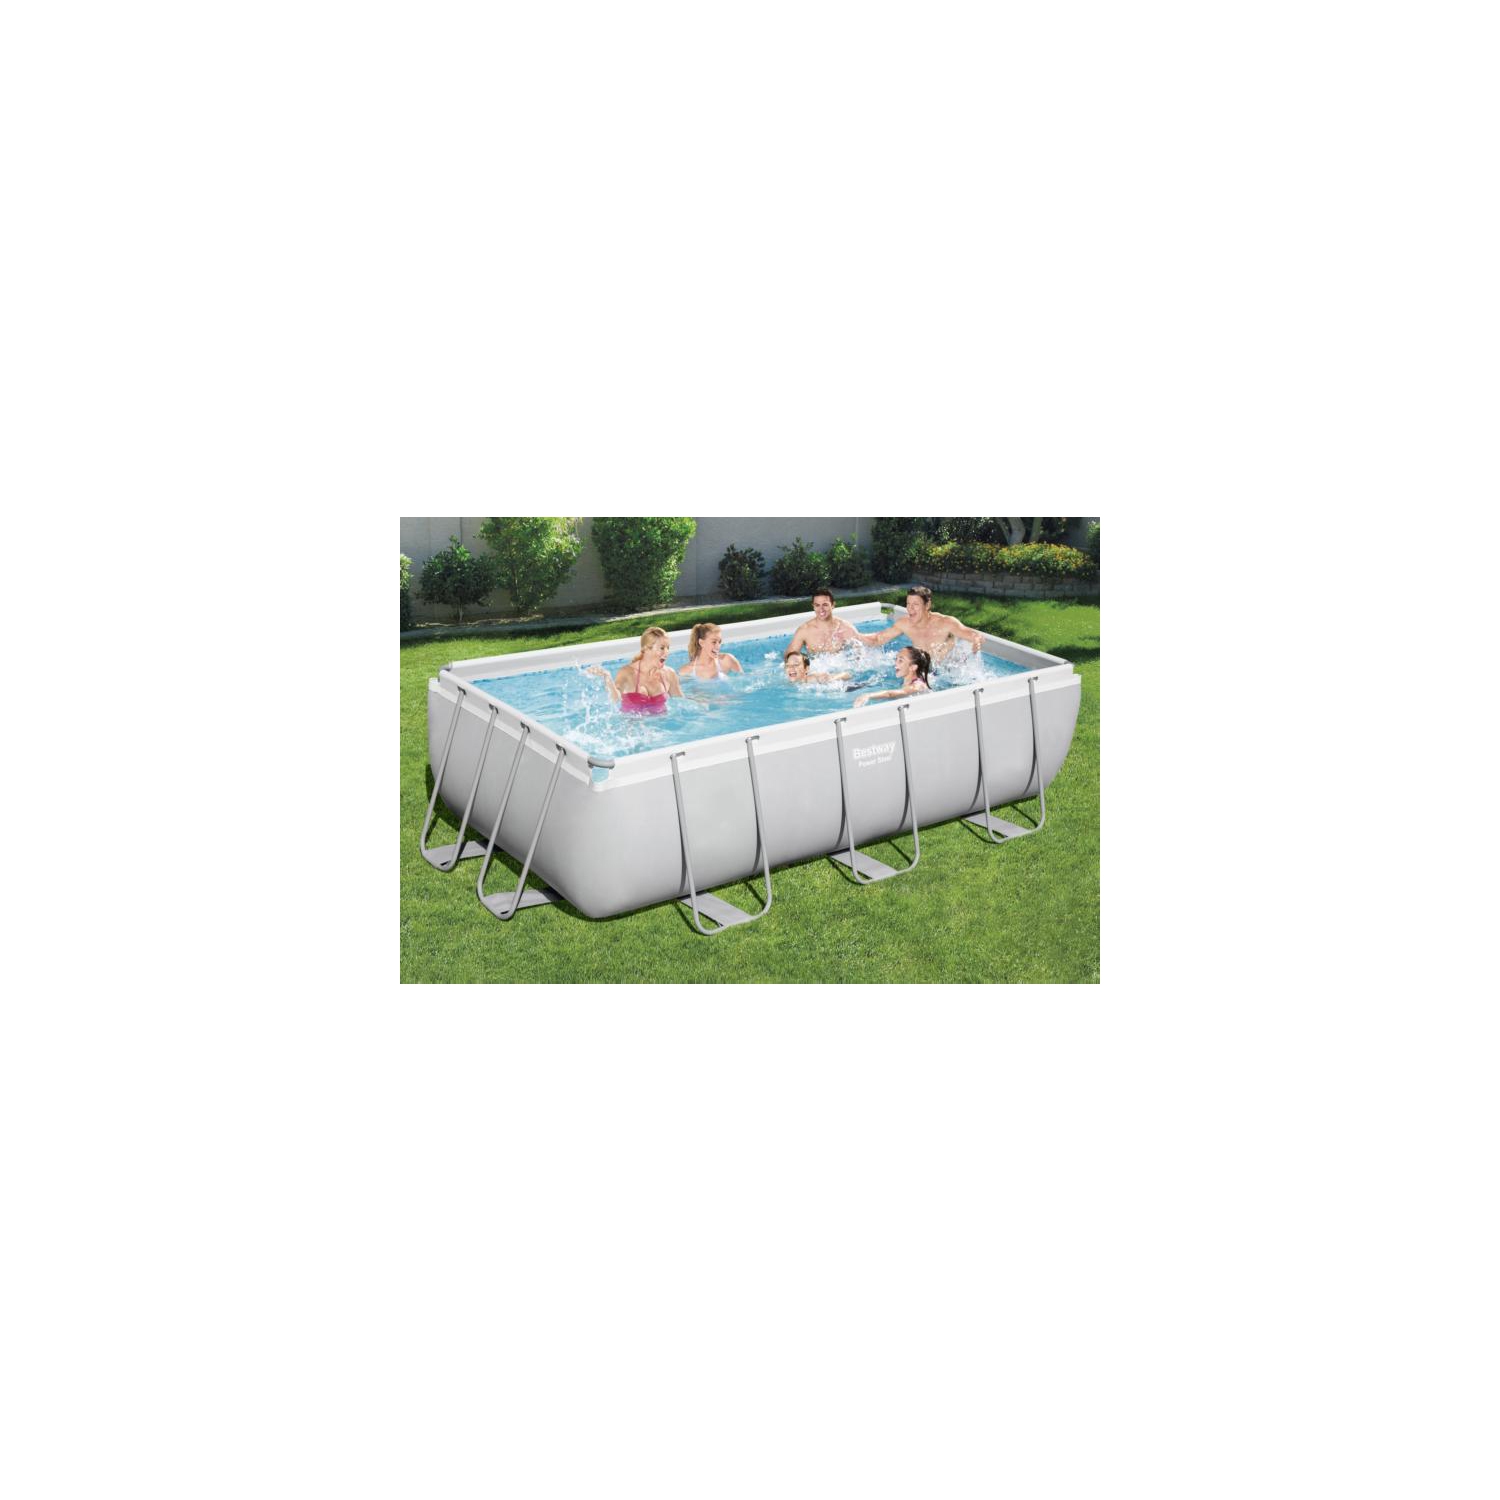 Bestway Power Steel™ 13'3" x 6'7" x 39.5"/4.04m x 2.01m x 1.00m Rectangular Pool Setwith ladder, chemical dispenser for clean and healthy pool water by chlorine, ladder.